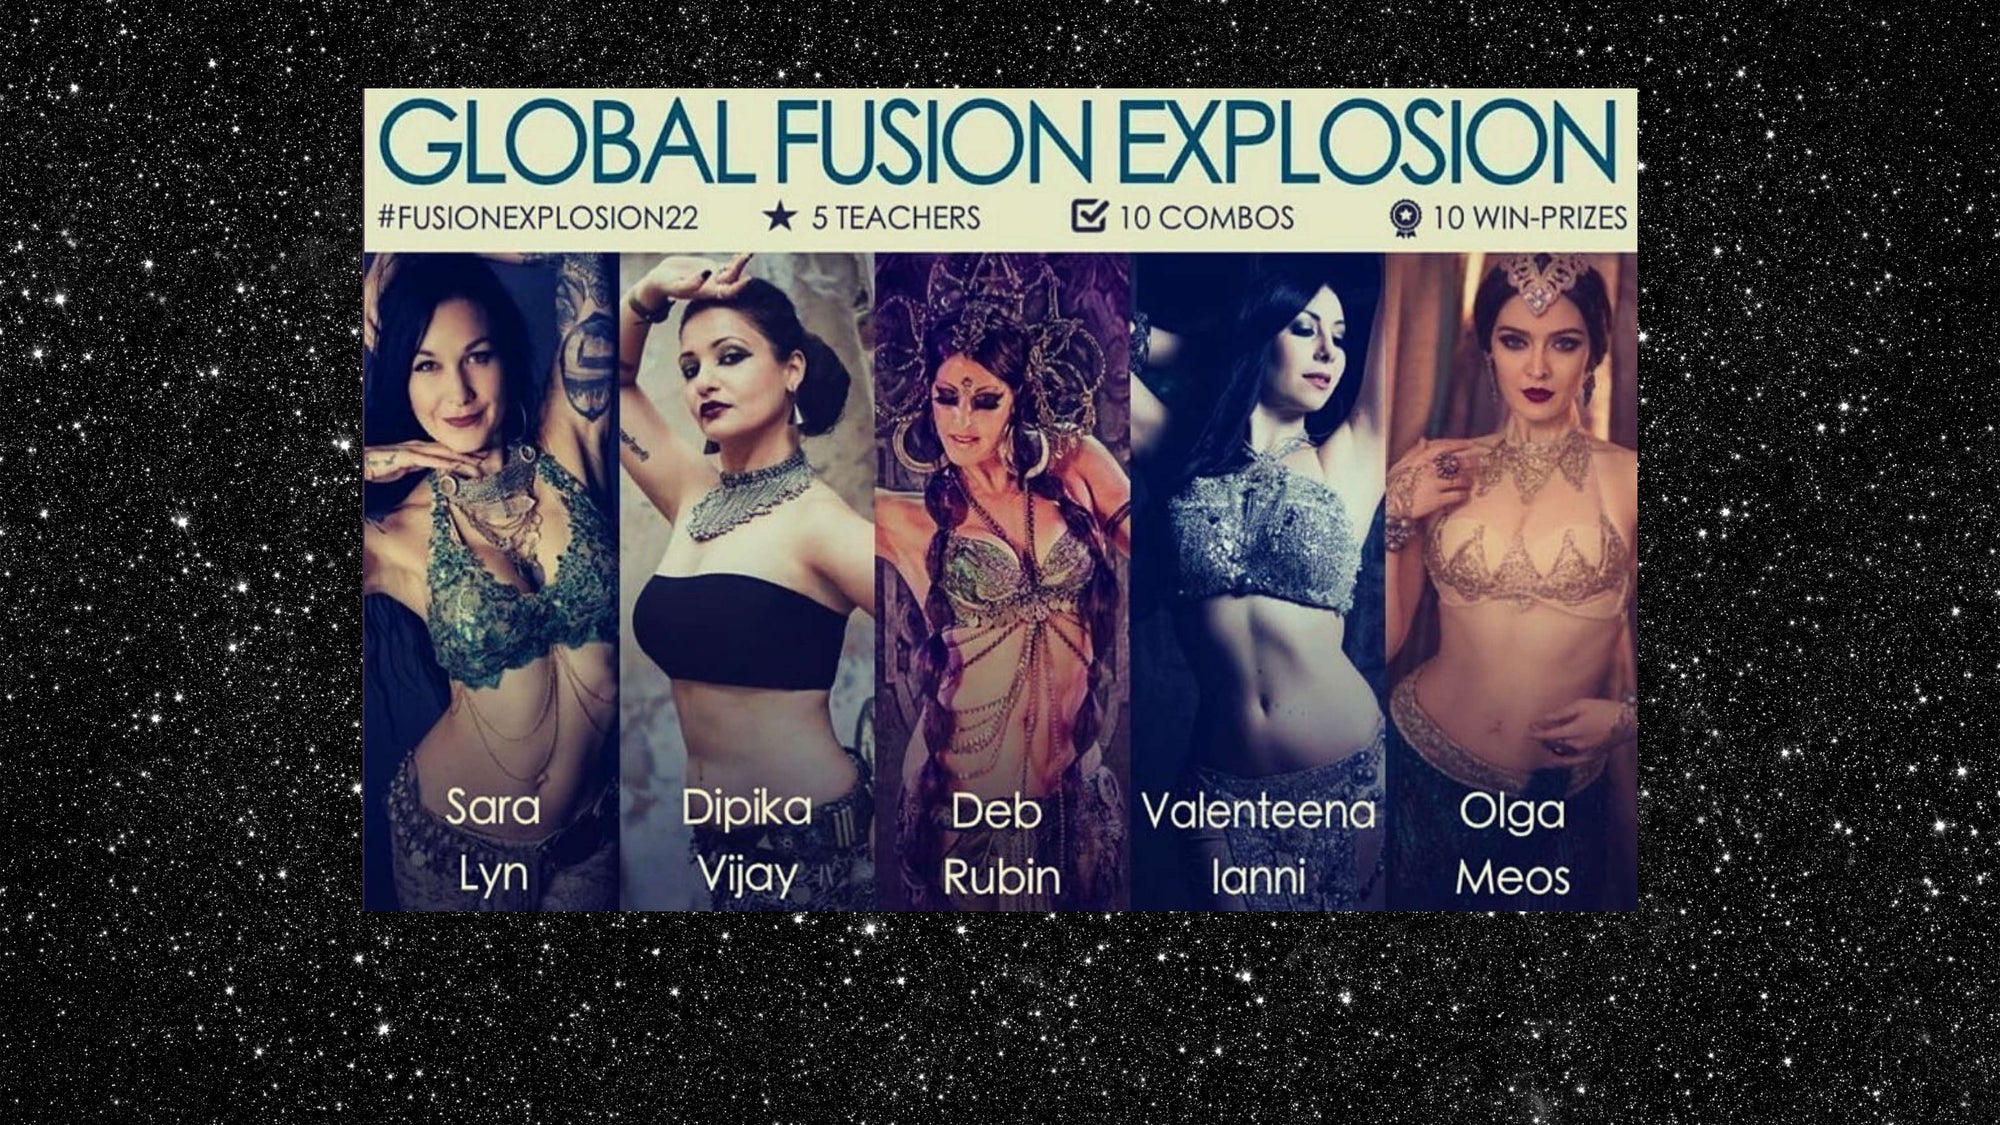 Global fusion explosion Instagram belly dance challenge 